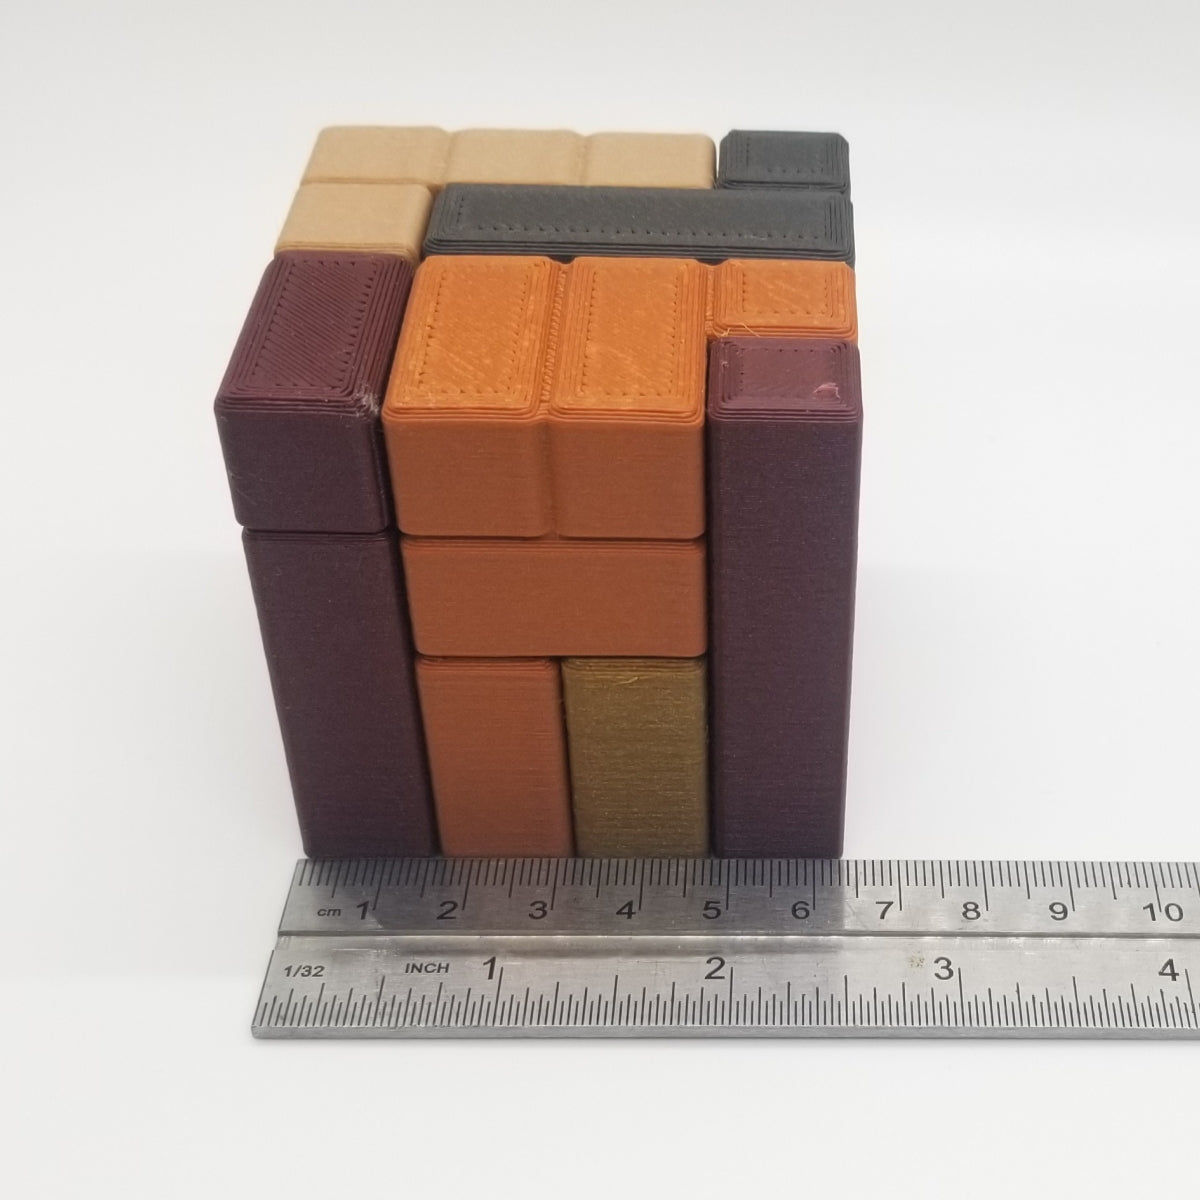 ChaoTIC - 3D Printed Wood Filament Puzzle